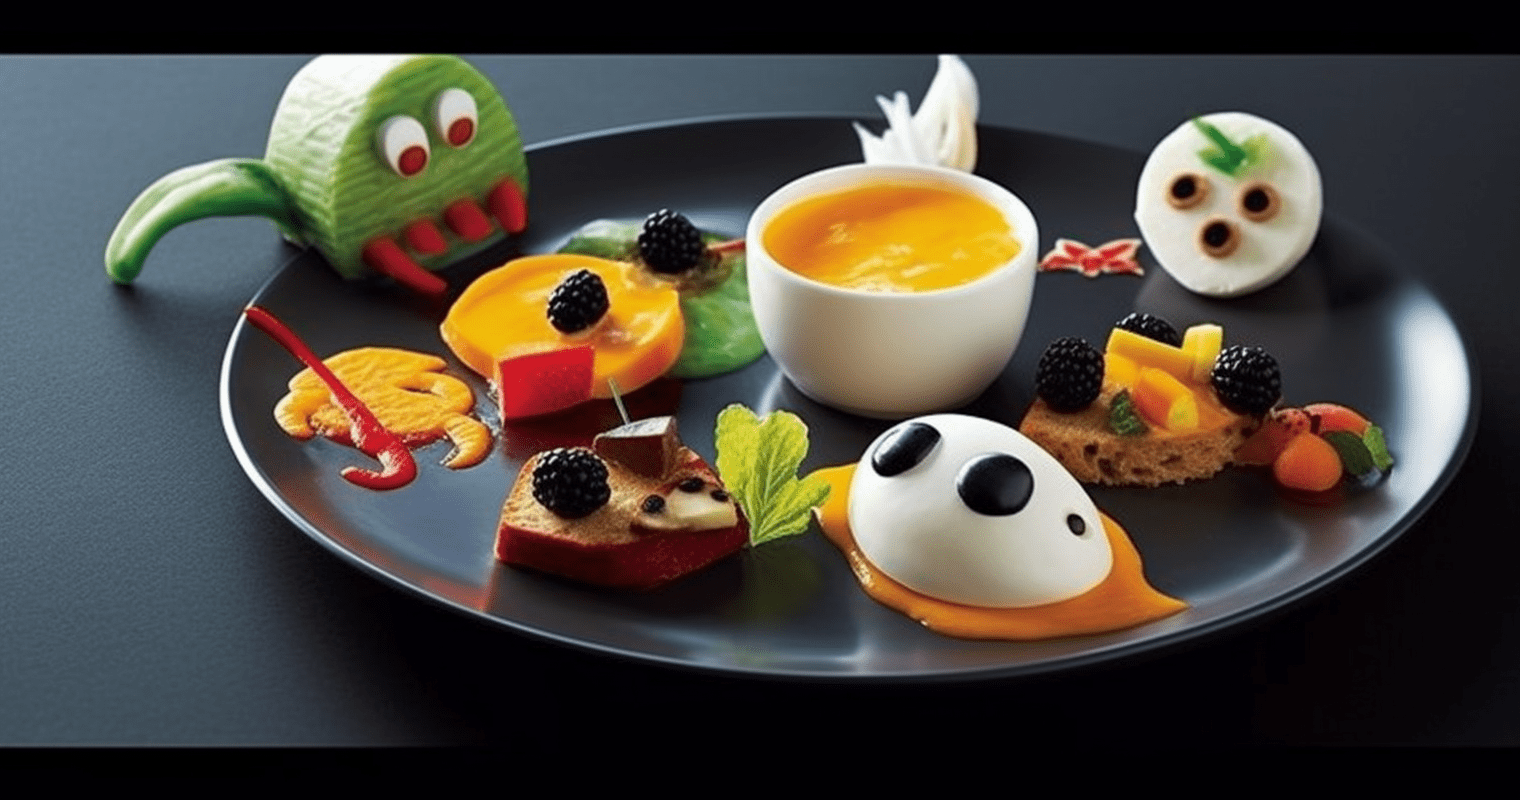 Delightful Halloween Lunch Ideas: How to Make Spooktacular Mummy Wraps